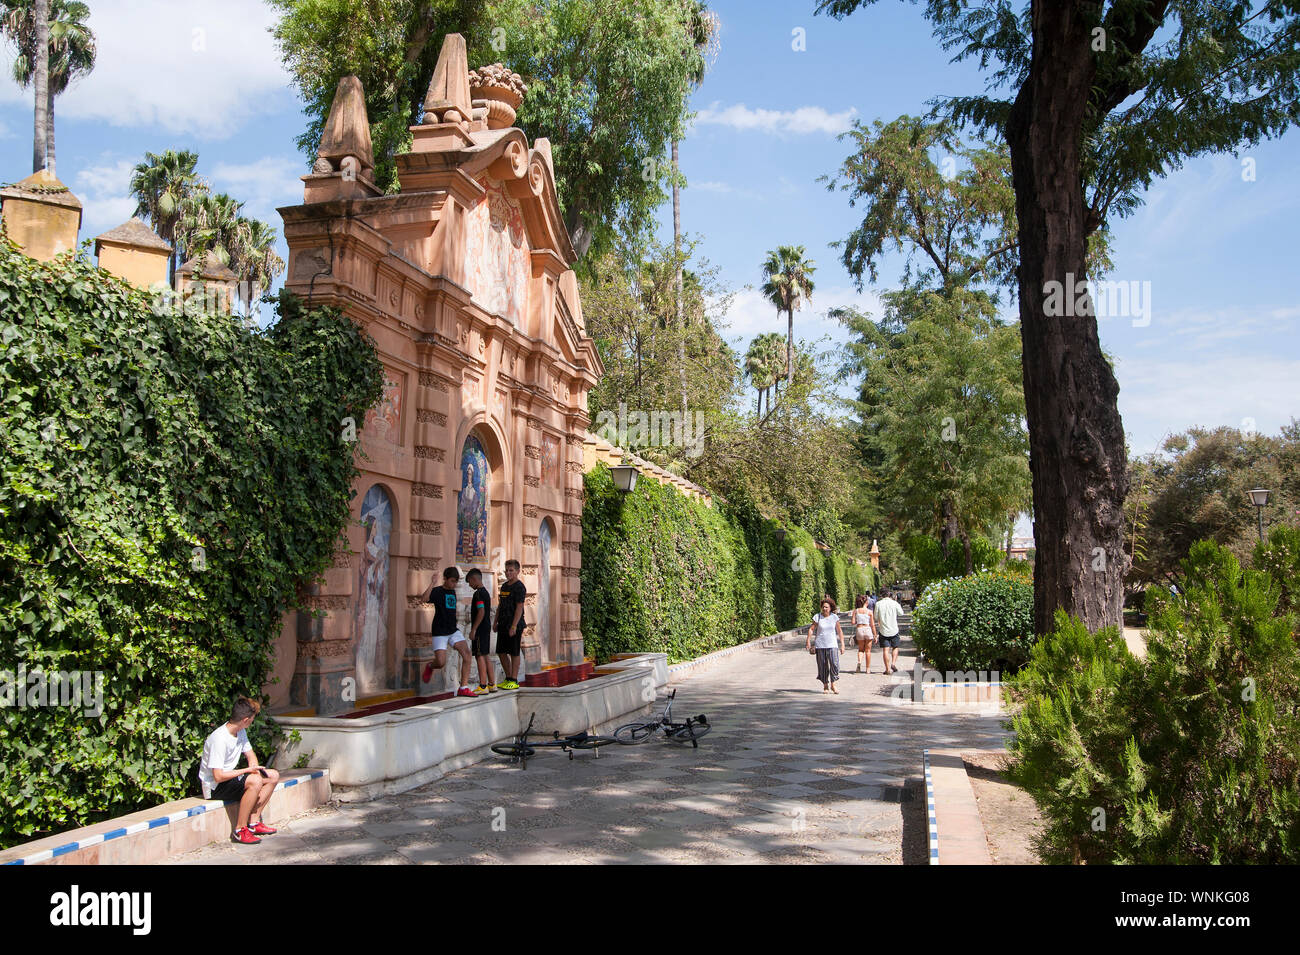 SPAIN, SEVILLE: A beautiful fountain outside of the Alcazar Palace gardens. Stock Photo